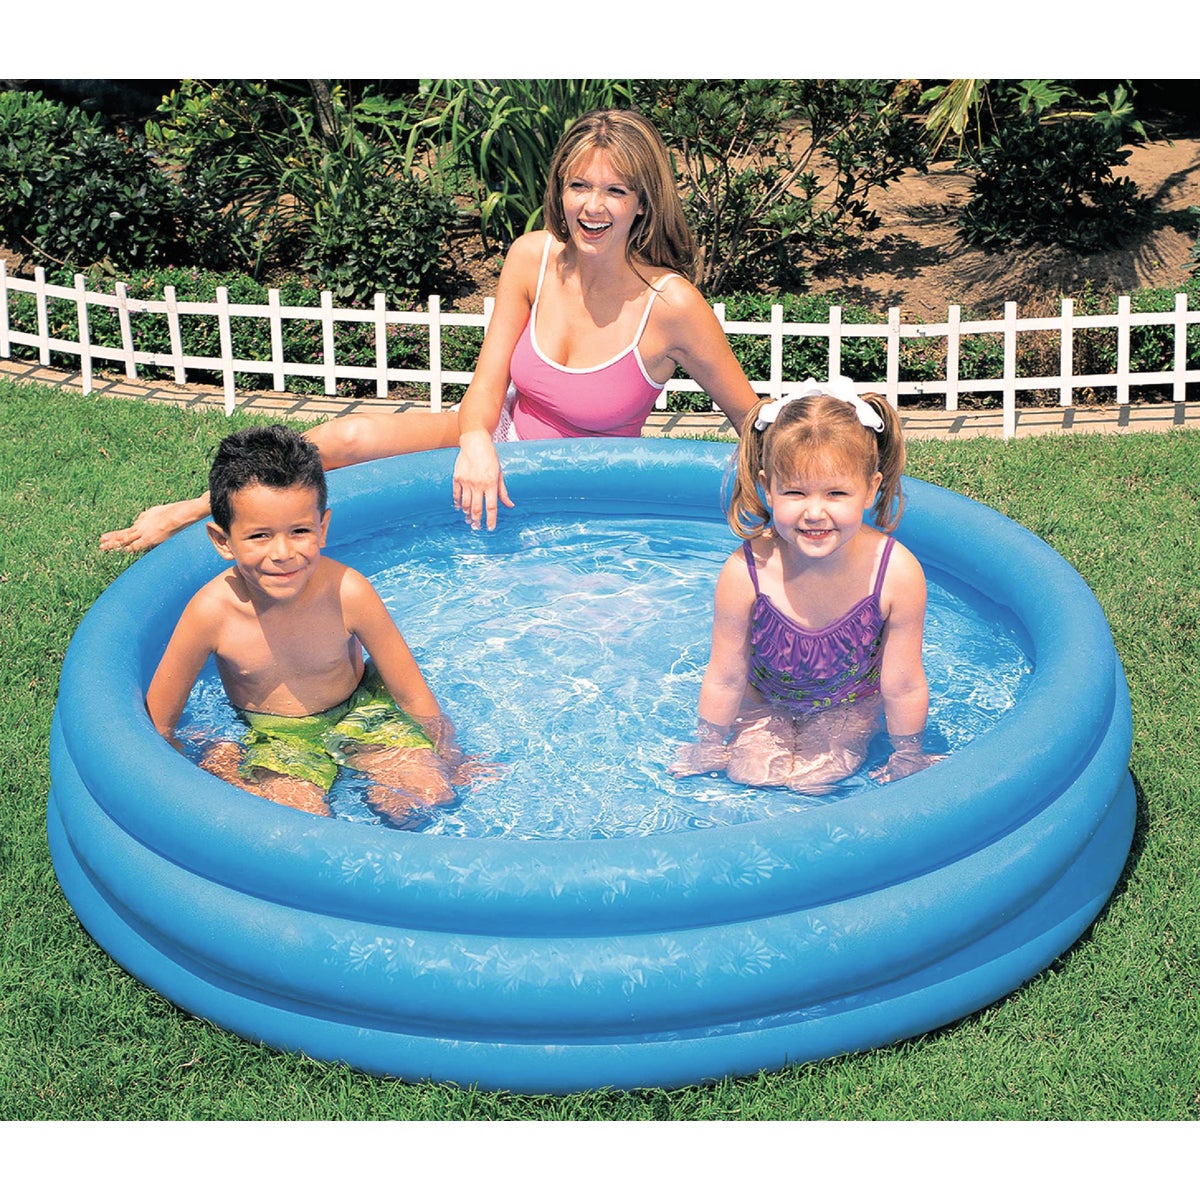 Item 843377, 58-inch inflatable pool for ages 3 and up.